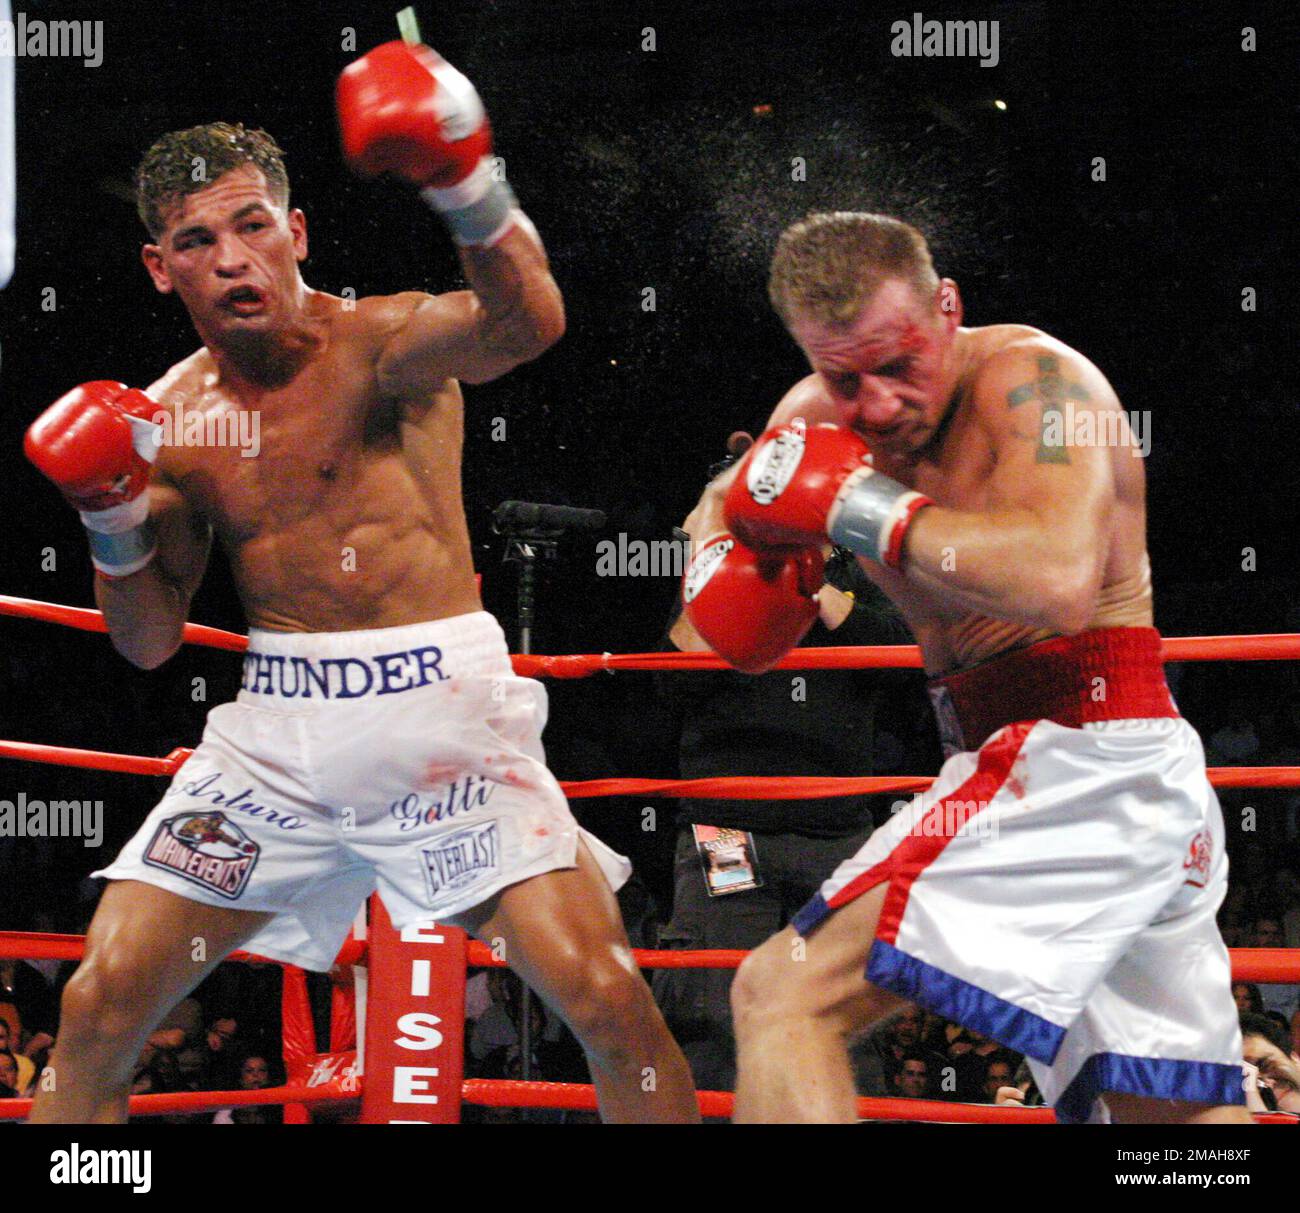 FILE - Arturo Gatti, left, punches Mickey Ward during the junior  welterweight fight in Atlantic City, N.J., on Saturday, June 7, 2003. The  fight lasted the the full 10 rounds and Gatti